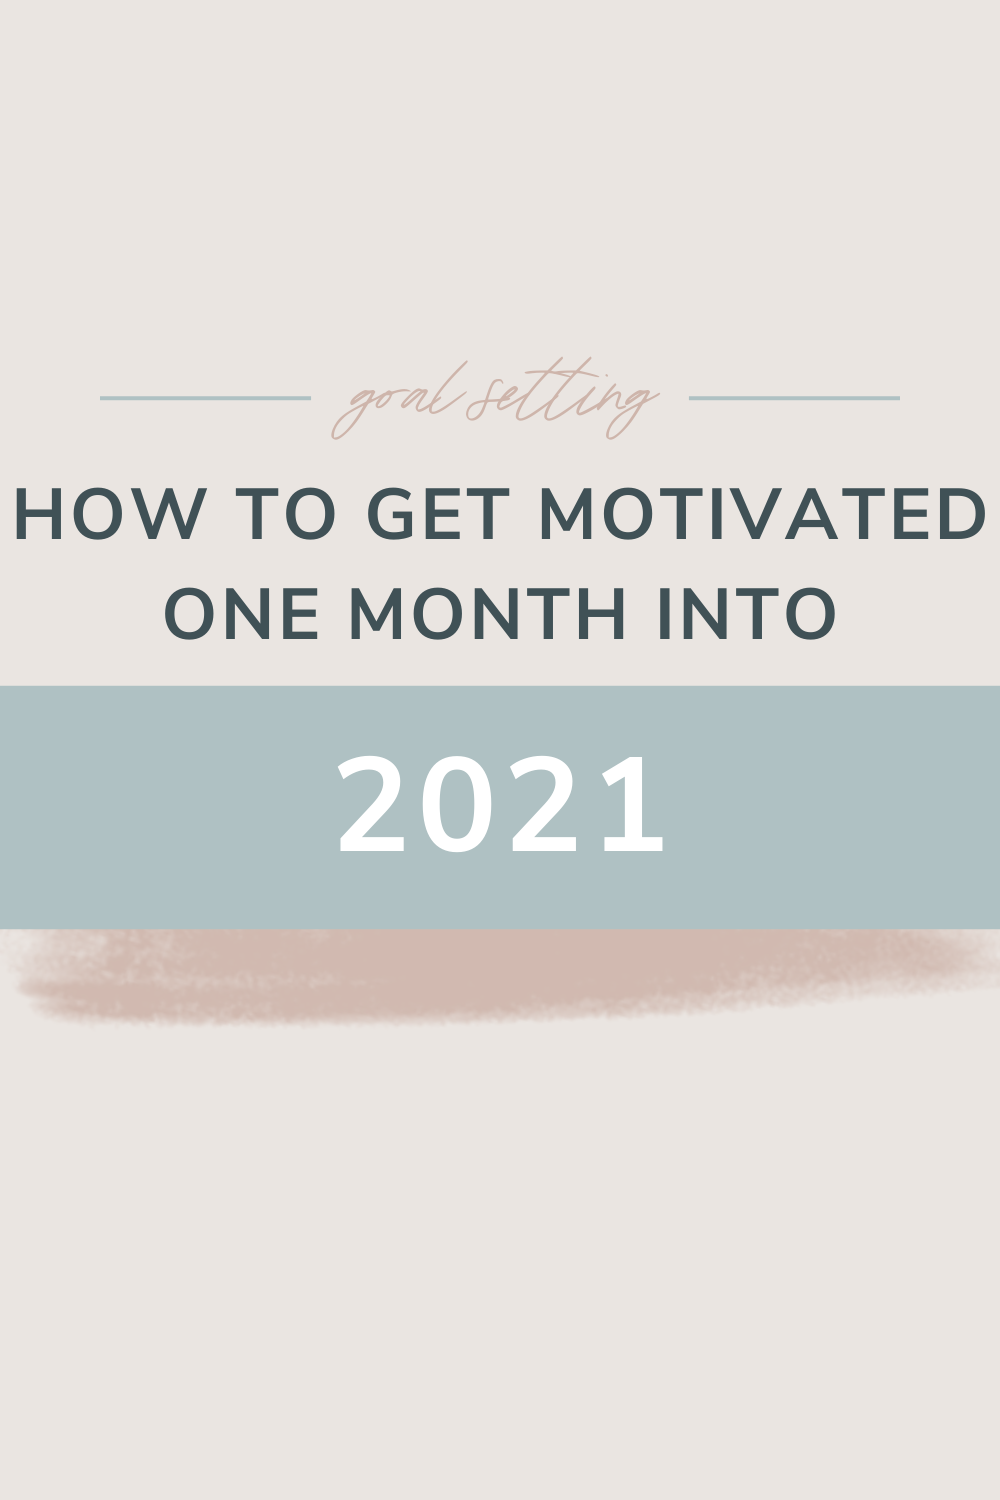 How to Get Motivated One Month into 2021 | Holiday hustle worn off? Now it's time to settle in and plan how you'll spend the next 11 months reaching your goals! Let's go!